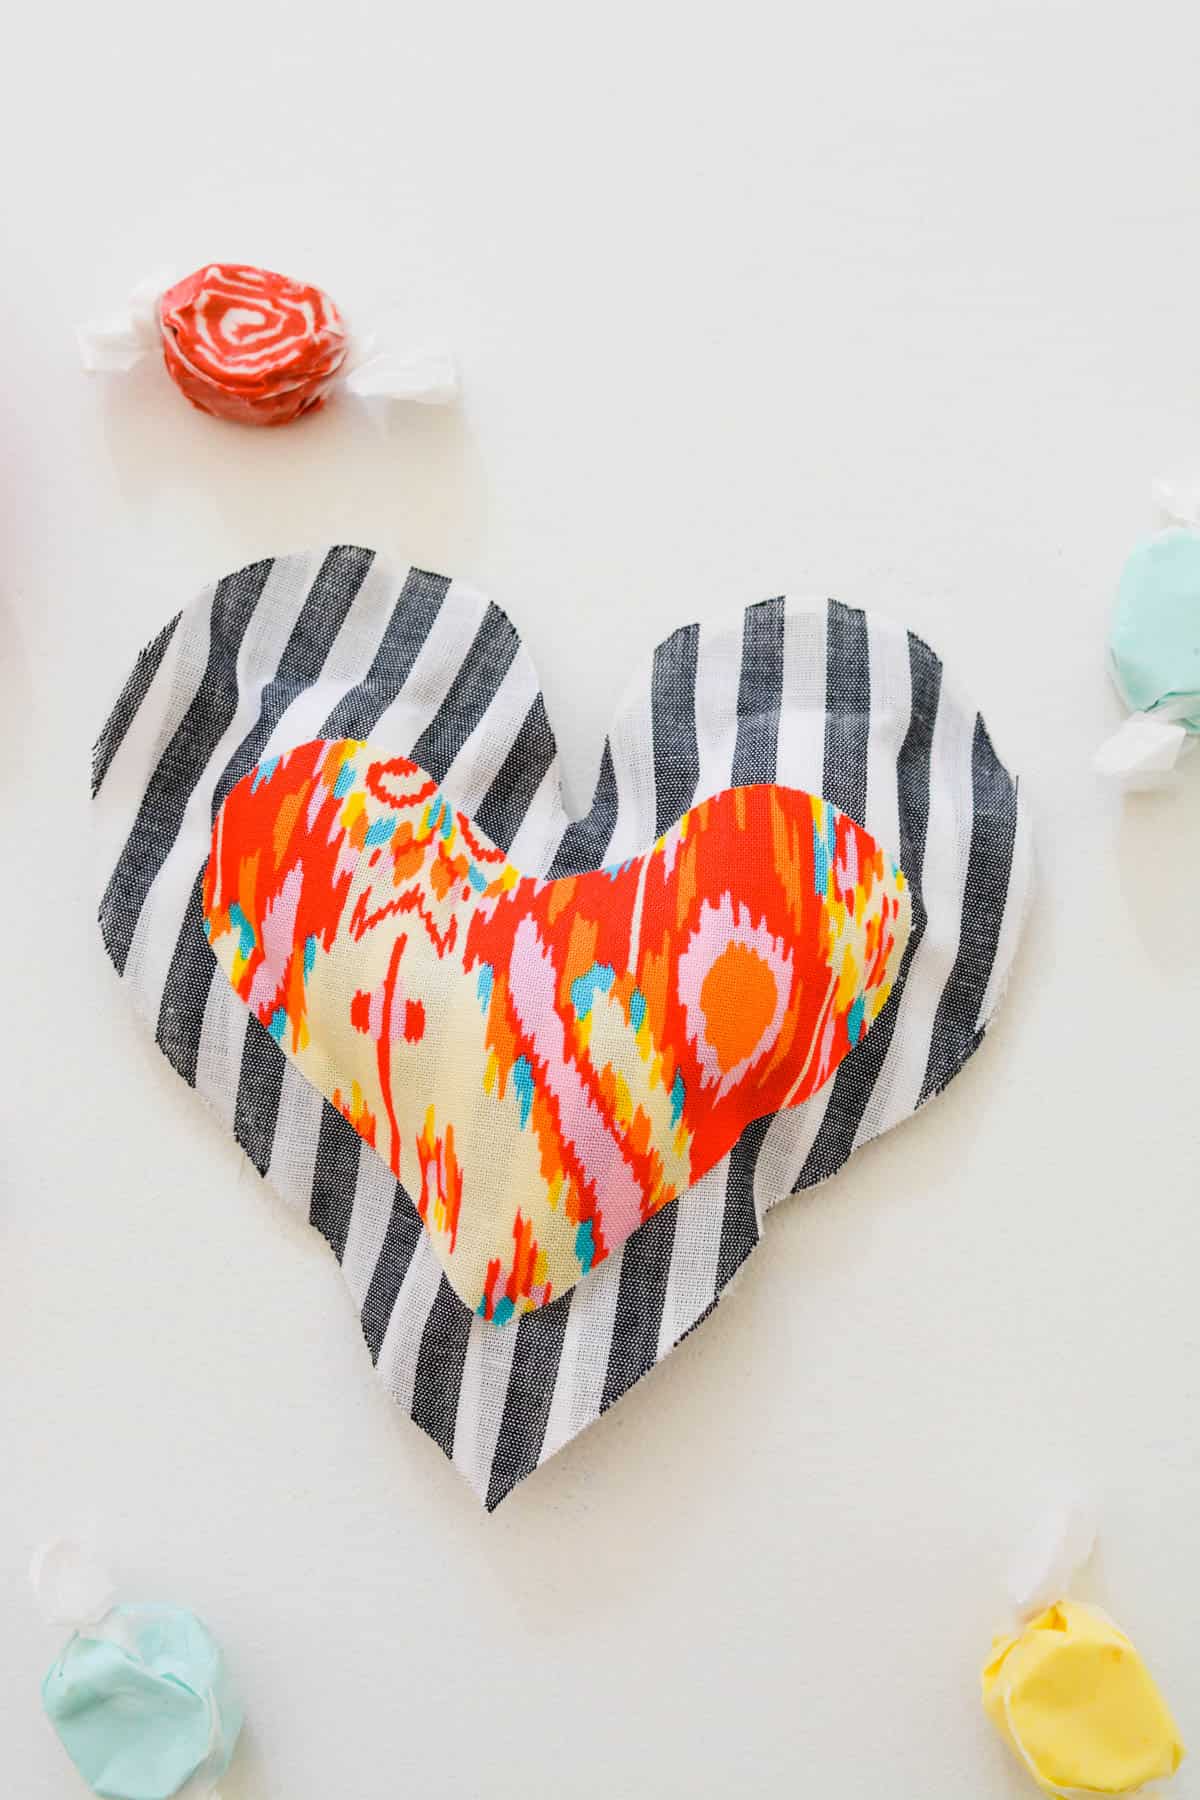 A DIY heart pillow made of fabric and shaped like a heart with some candy next to it.